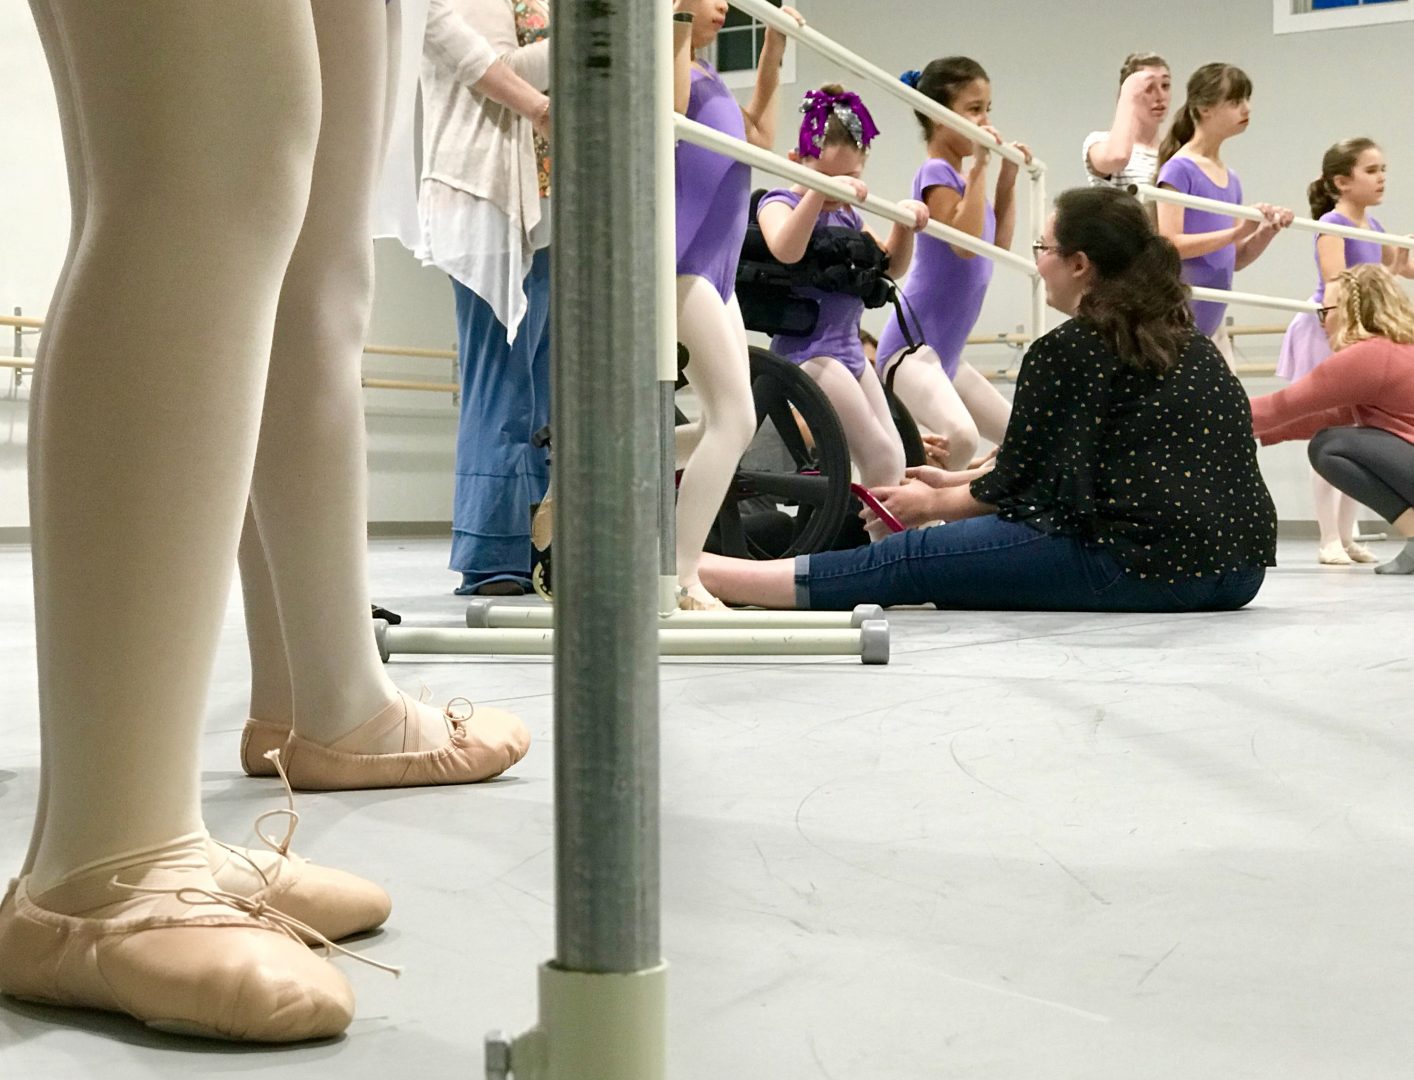 The bALLet program is housed at the Pennsylvania Ballet Academy in Camp Hill and is open to children of all abilities.